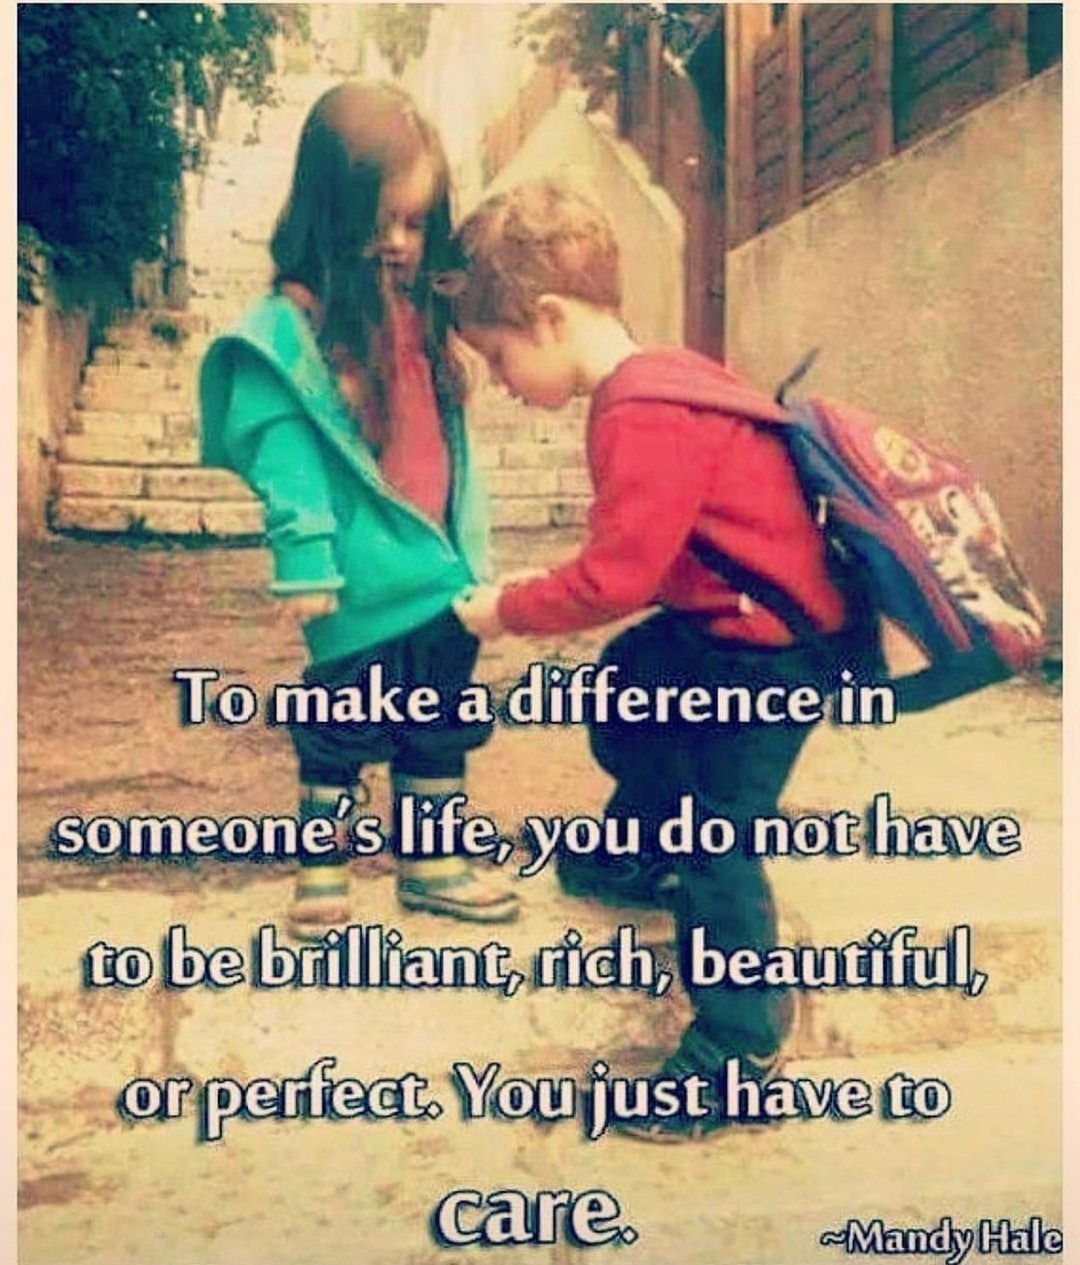 To make a difference in life; you do not have to be brilliant, rich, beautiful, or perfect. You just have to care.